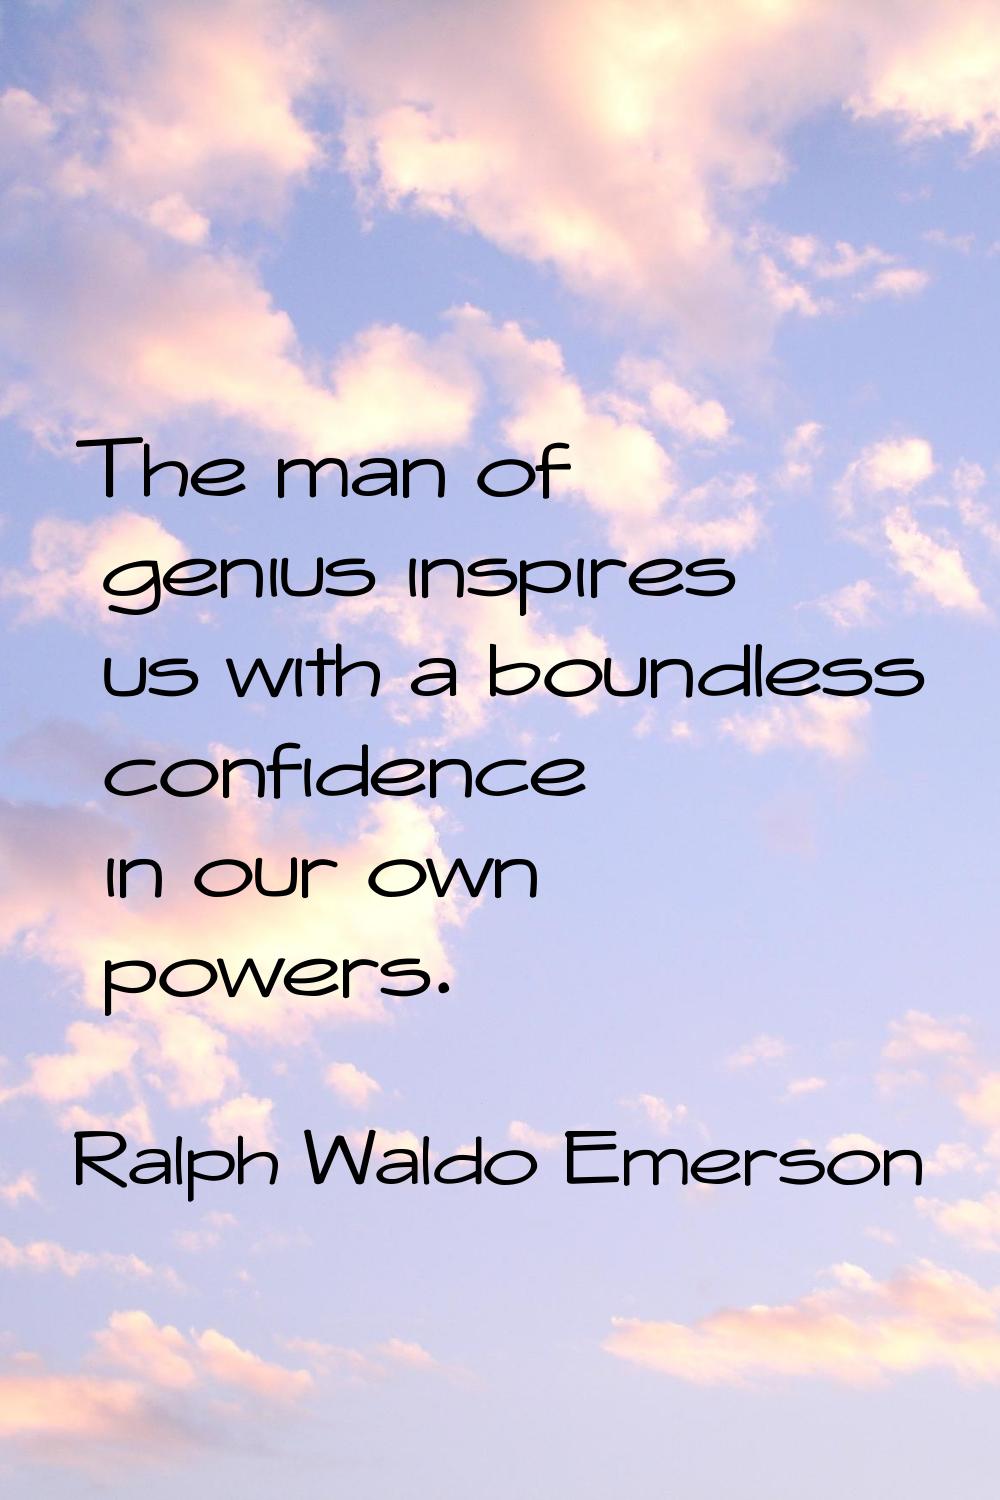 The man of genius inspires us with a boundless confidence in our own powers.